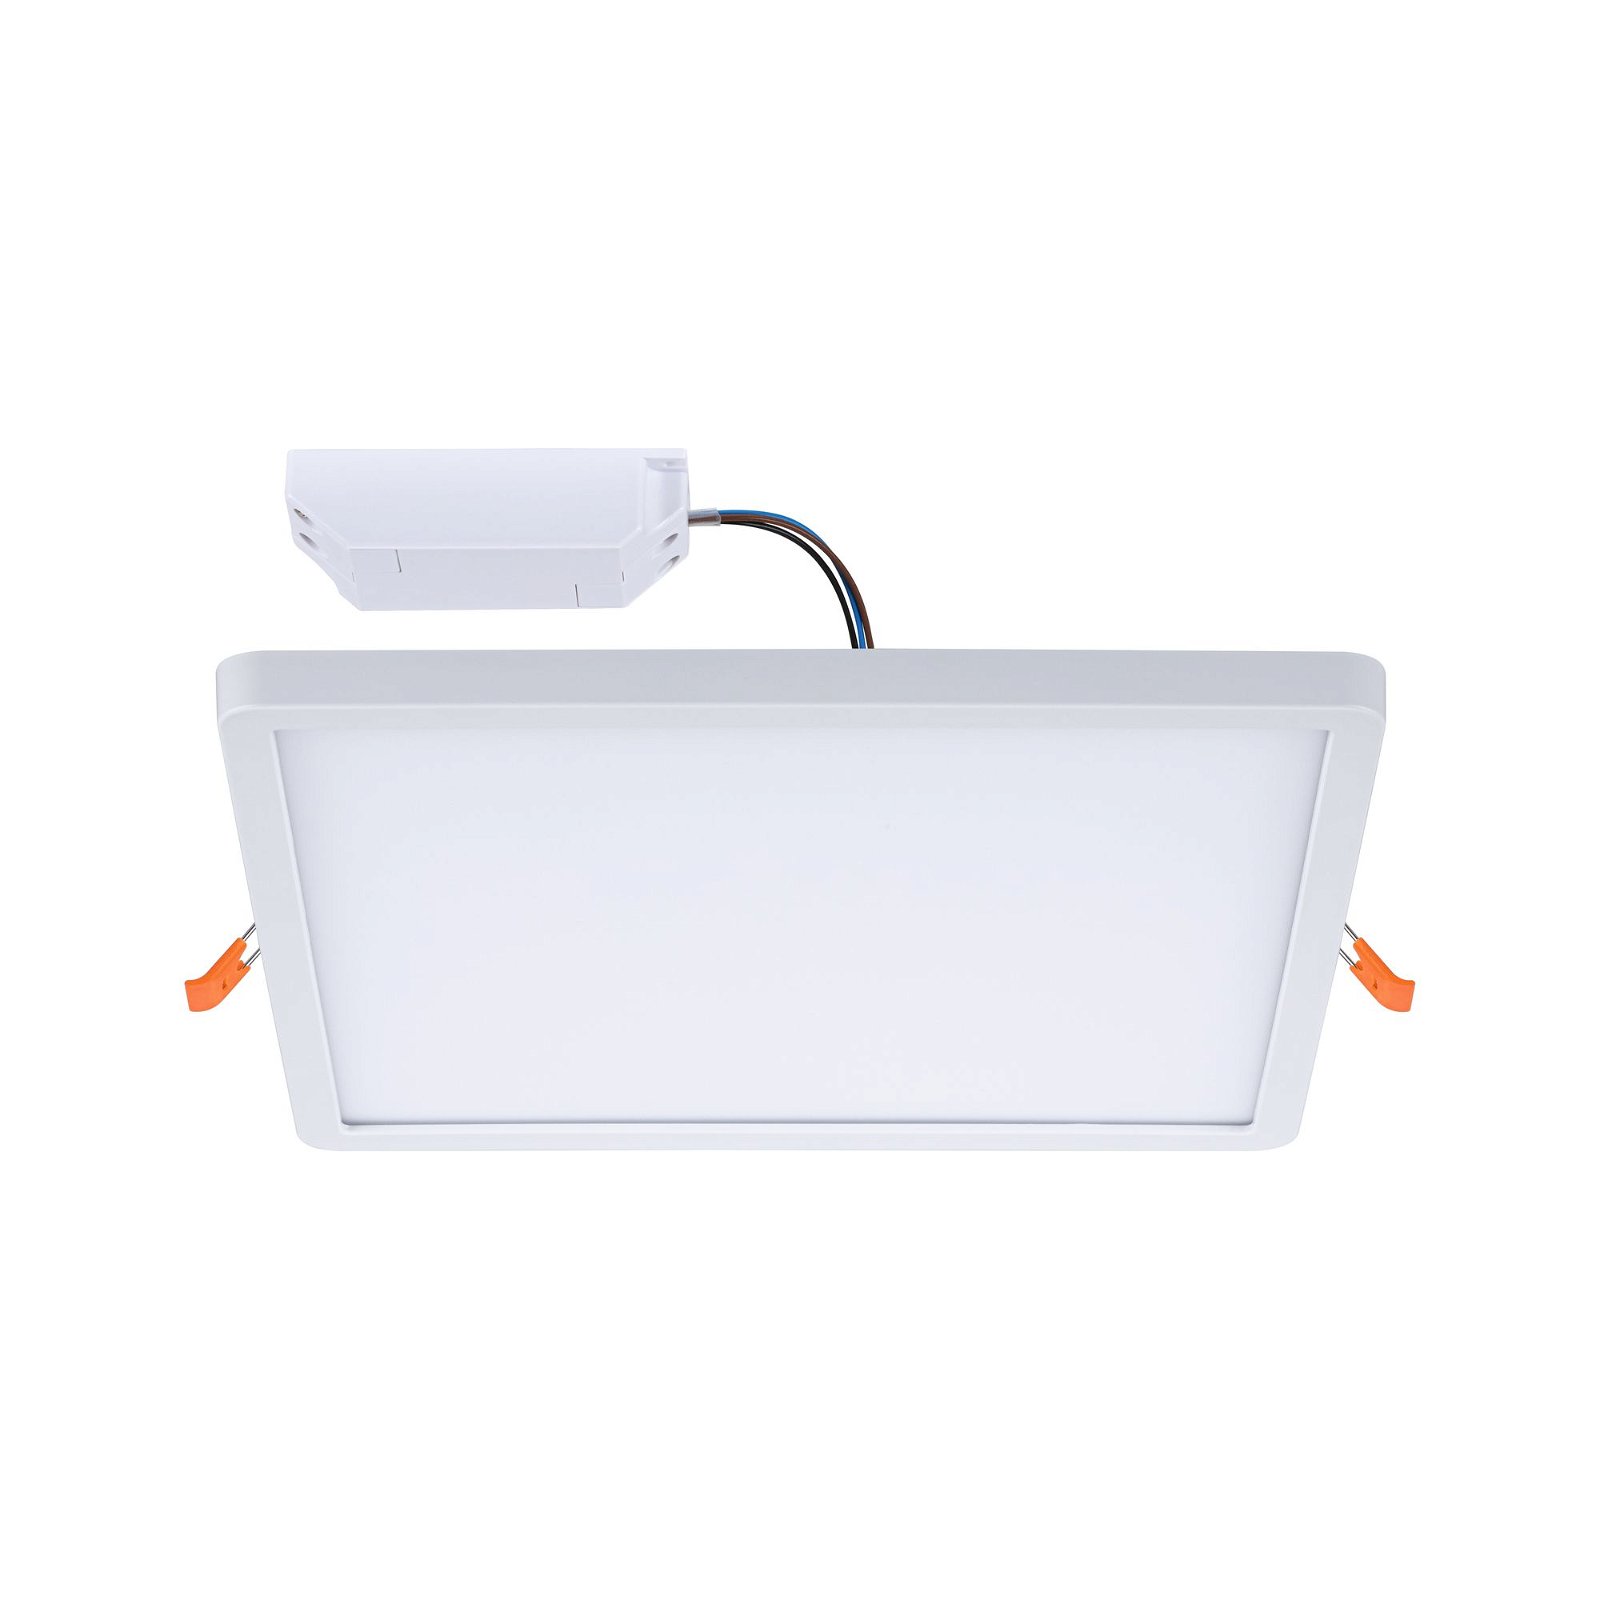 VariFit LED Recessed panel Dim to Warm Areo IP44 square 230x230mm 16W 1400lm 3 Step Dim to warm Matt white dimmable